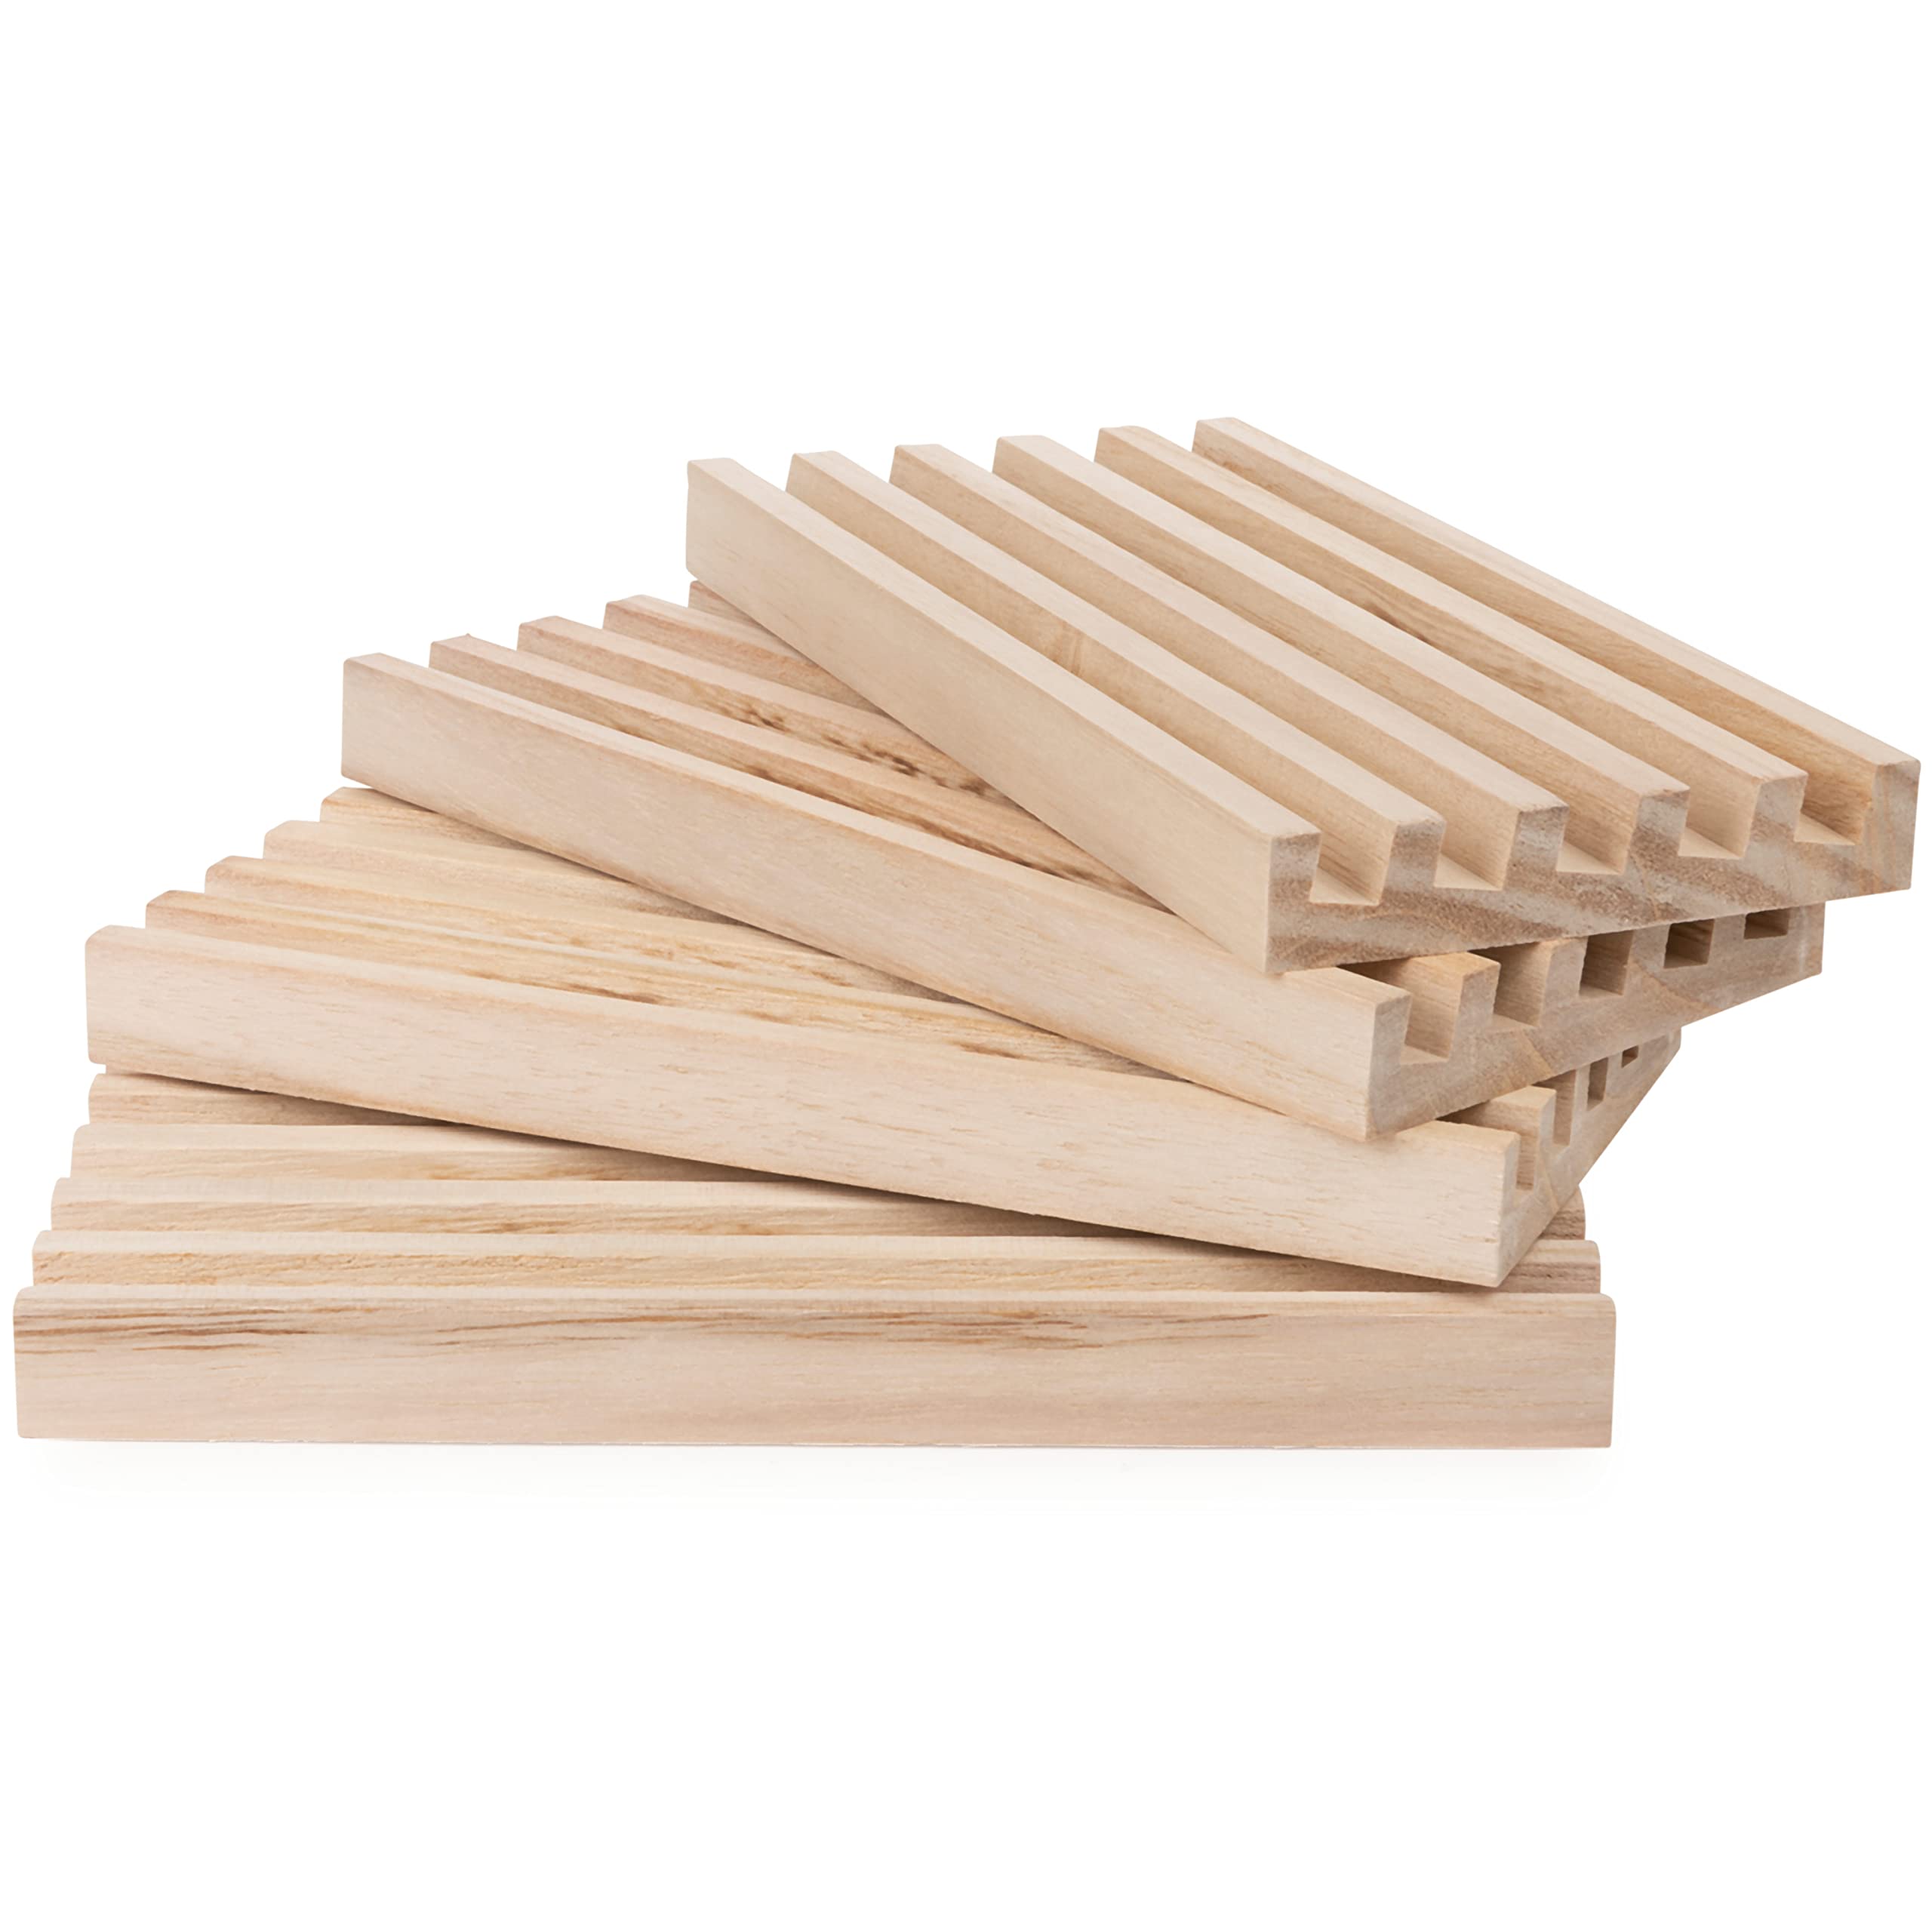 Wood Domino Racks, Set of 4 Trays for Mexican Train and Other Dominoes Games, for Families and Kids Ages 8 and up